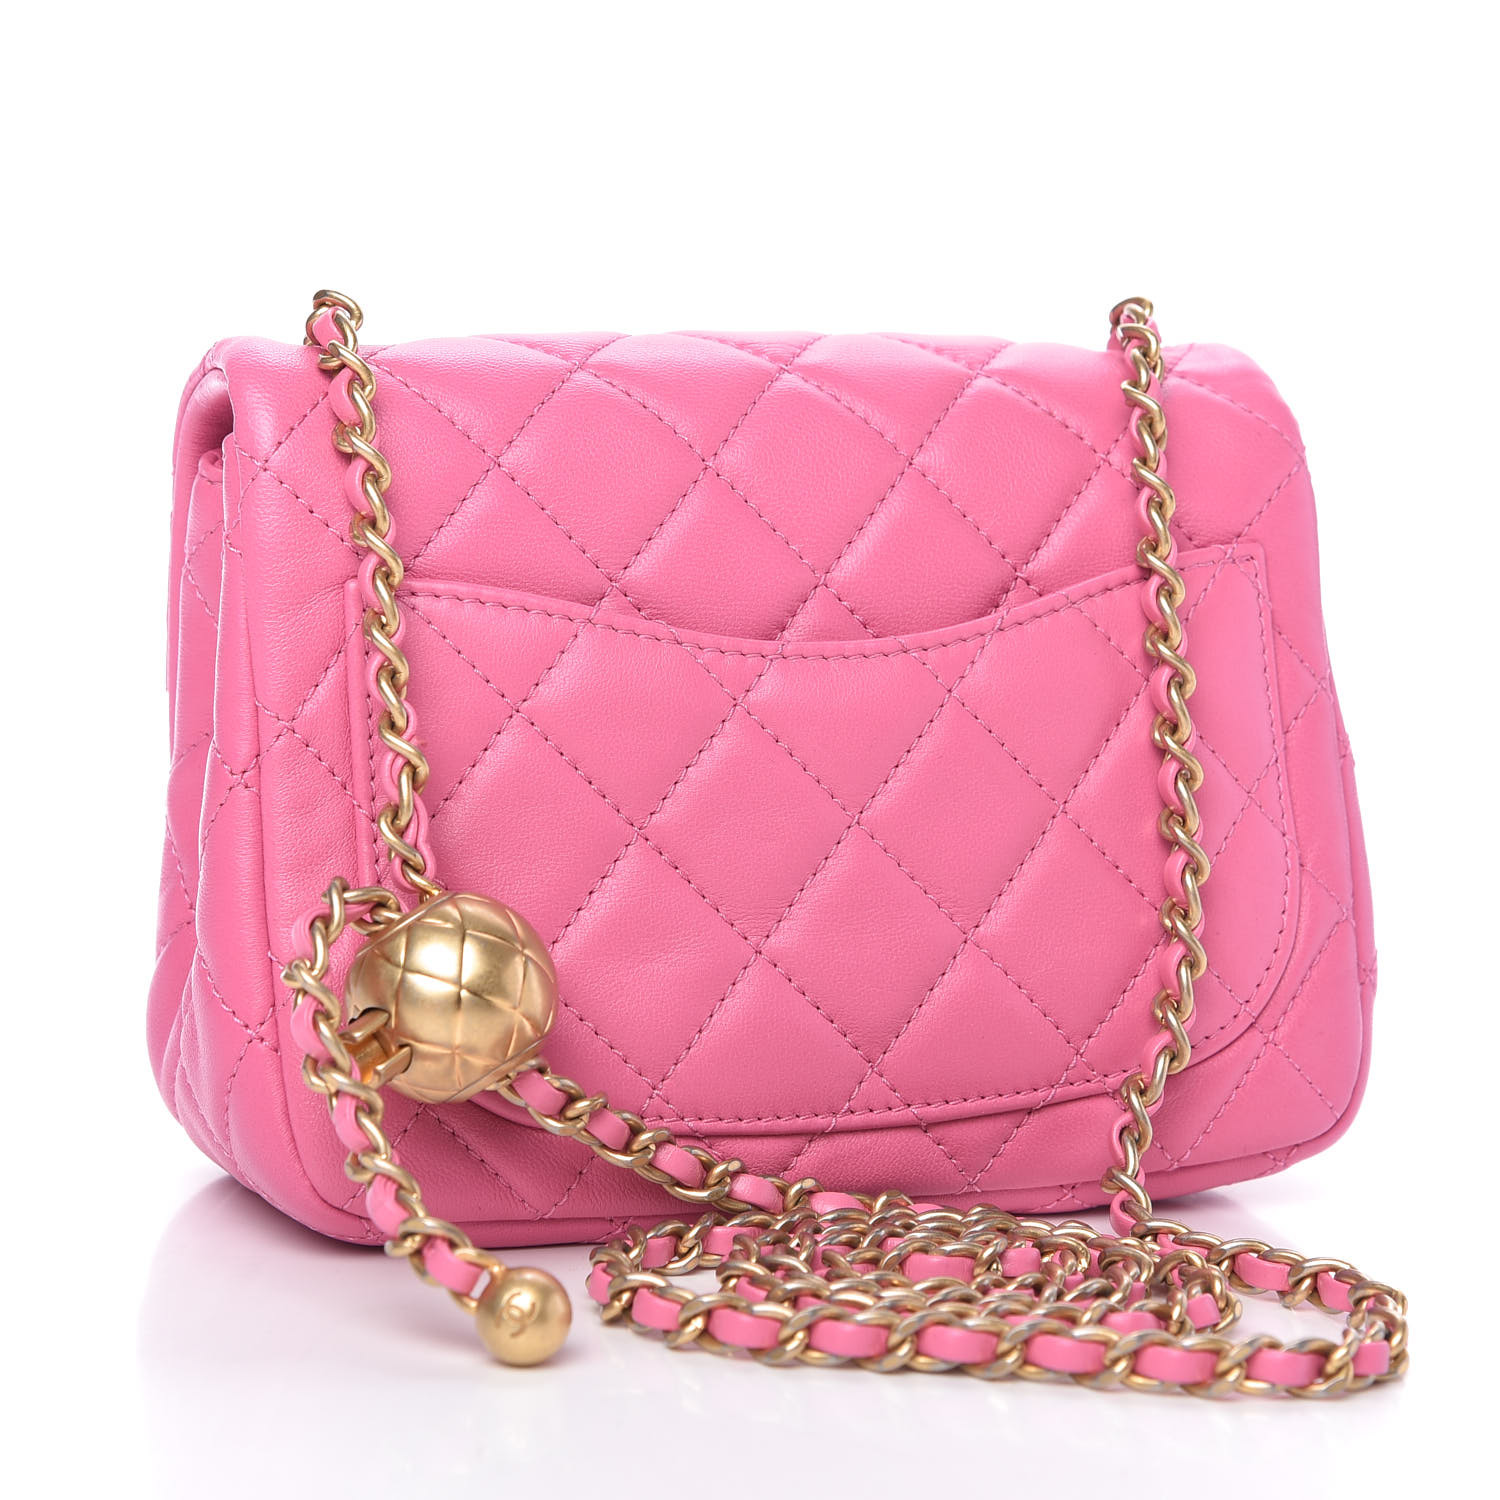 CHANEL Lambskin Quilted Mini CC Pearl Crush Flap Pink 755991 | FASHIONPHILE